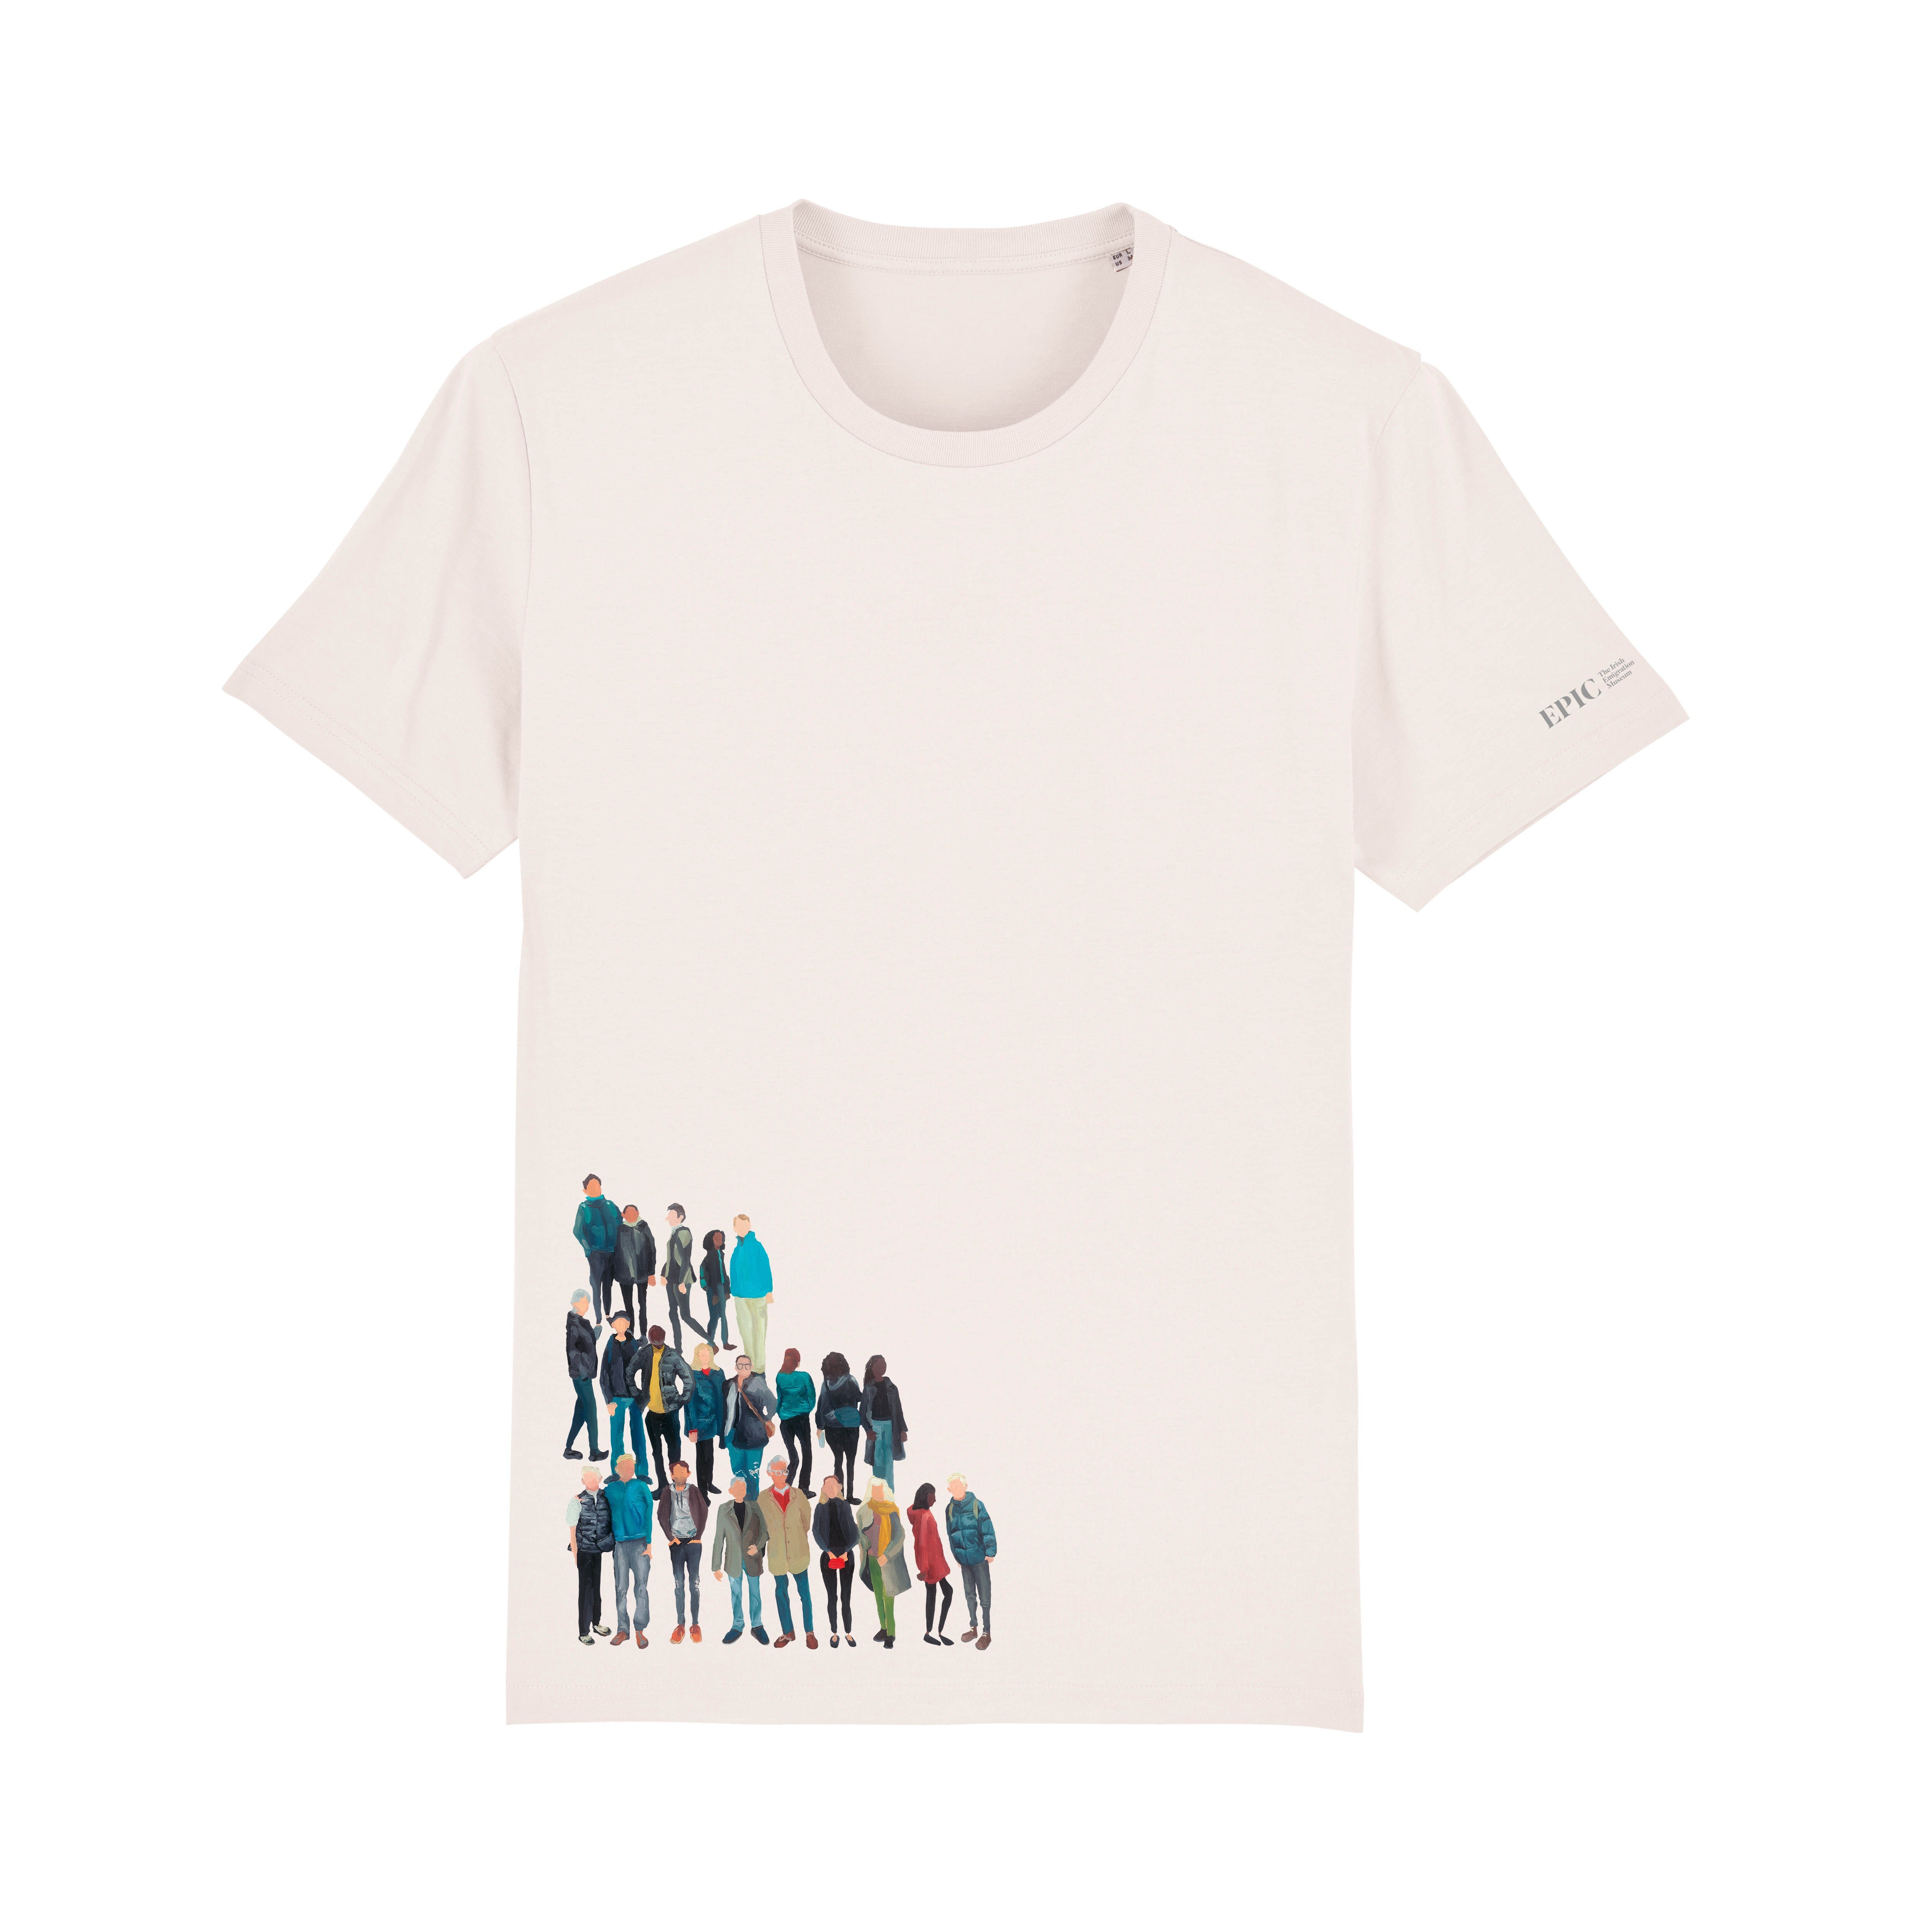 Connection Tshirt